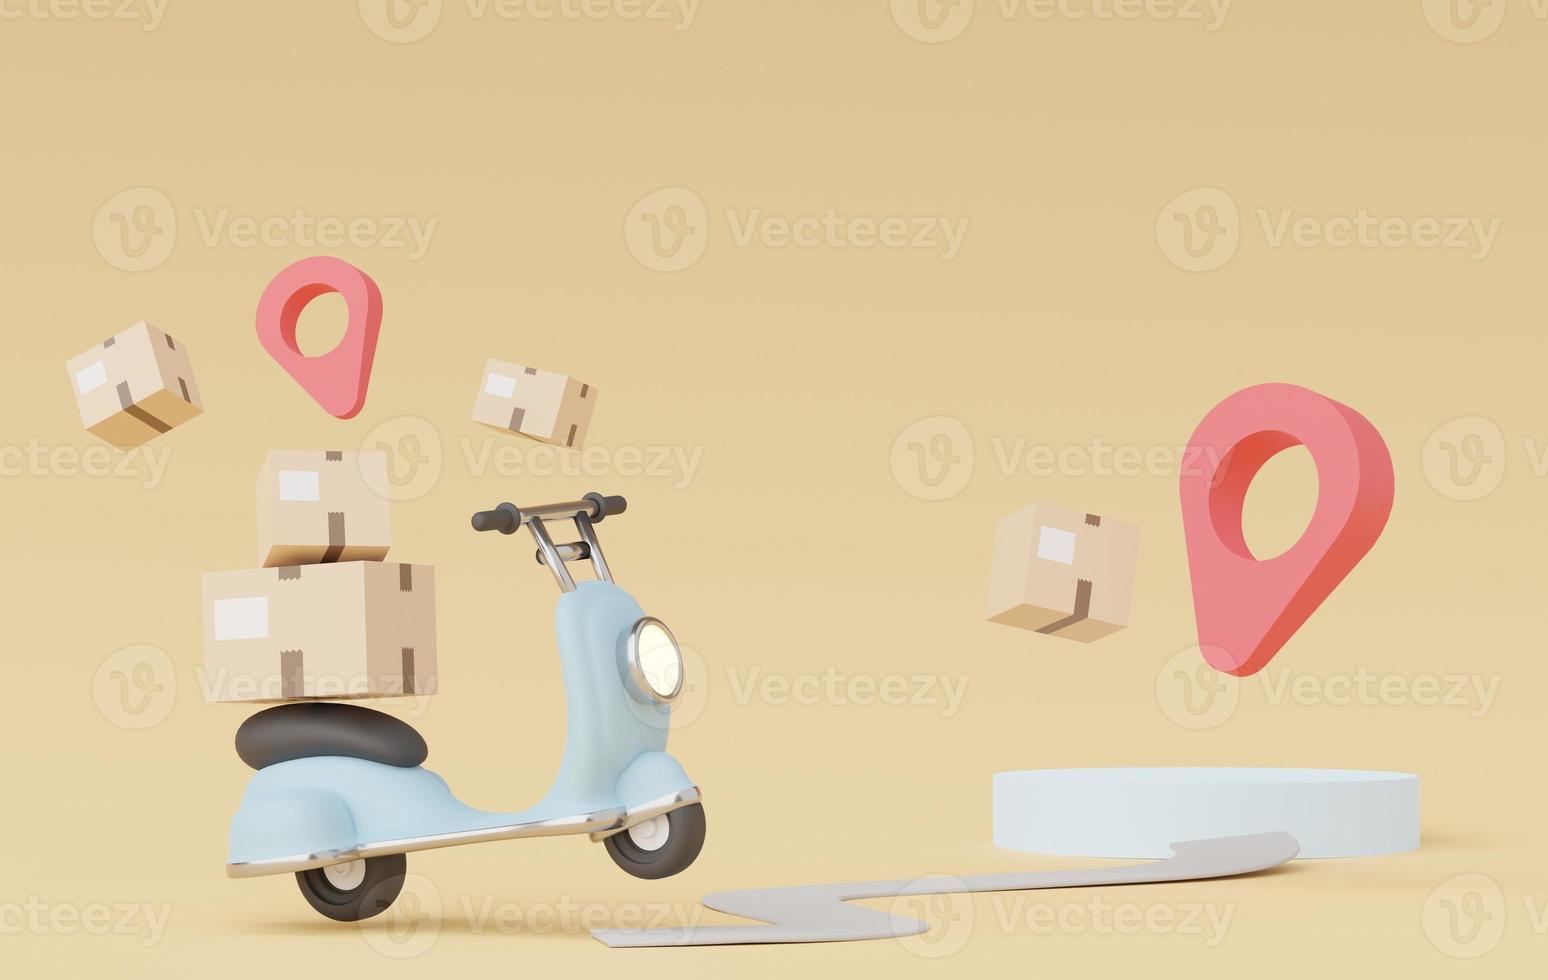 3d render of minimal cartoon of parcel delivery scooter or motorbike. Online shopping and fast delivery concept. Express logistic services. photo